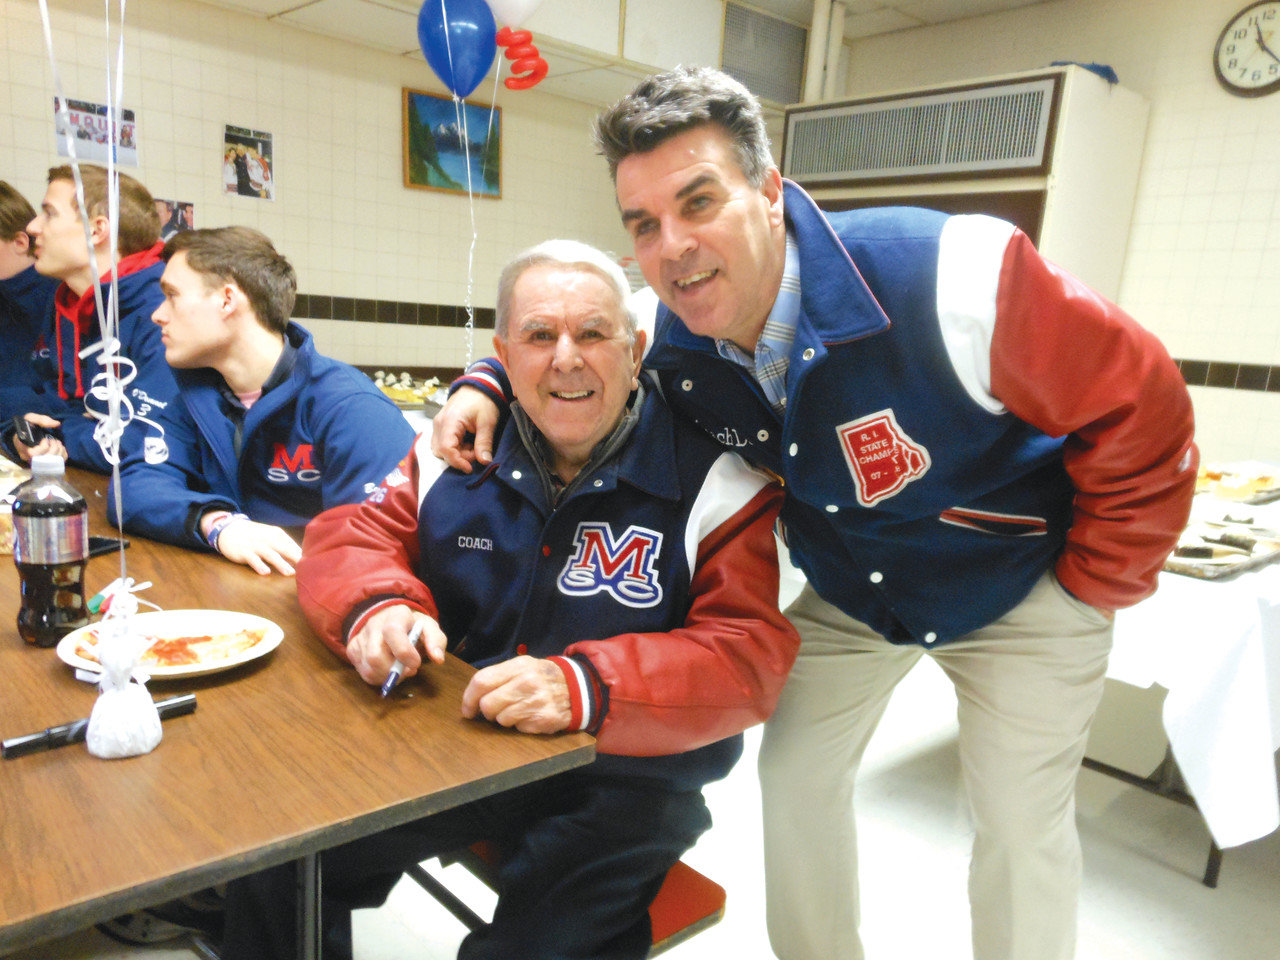 Normand “Bill” Belisle, hockey coach of 42 years at Mount St. Charles Academy, and his son, Dave, smile at an event honoring the older Belisle’s induction into the U.S. Hockey Hall of Fame in 2016.